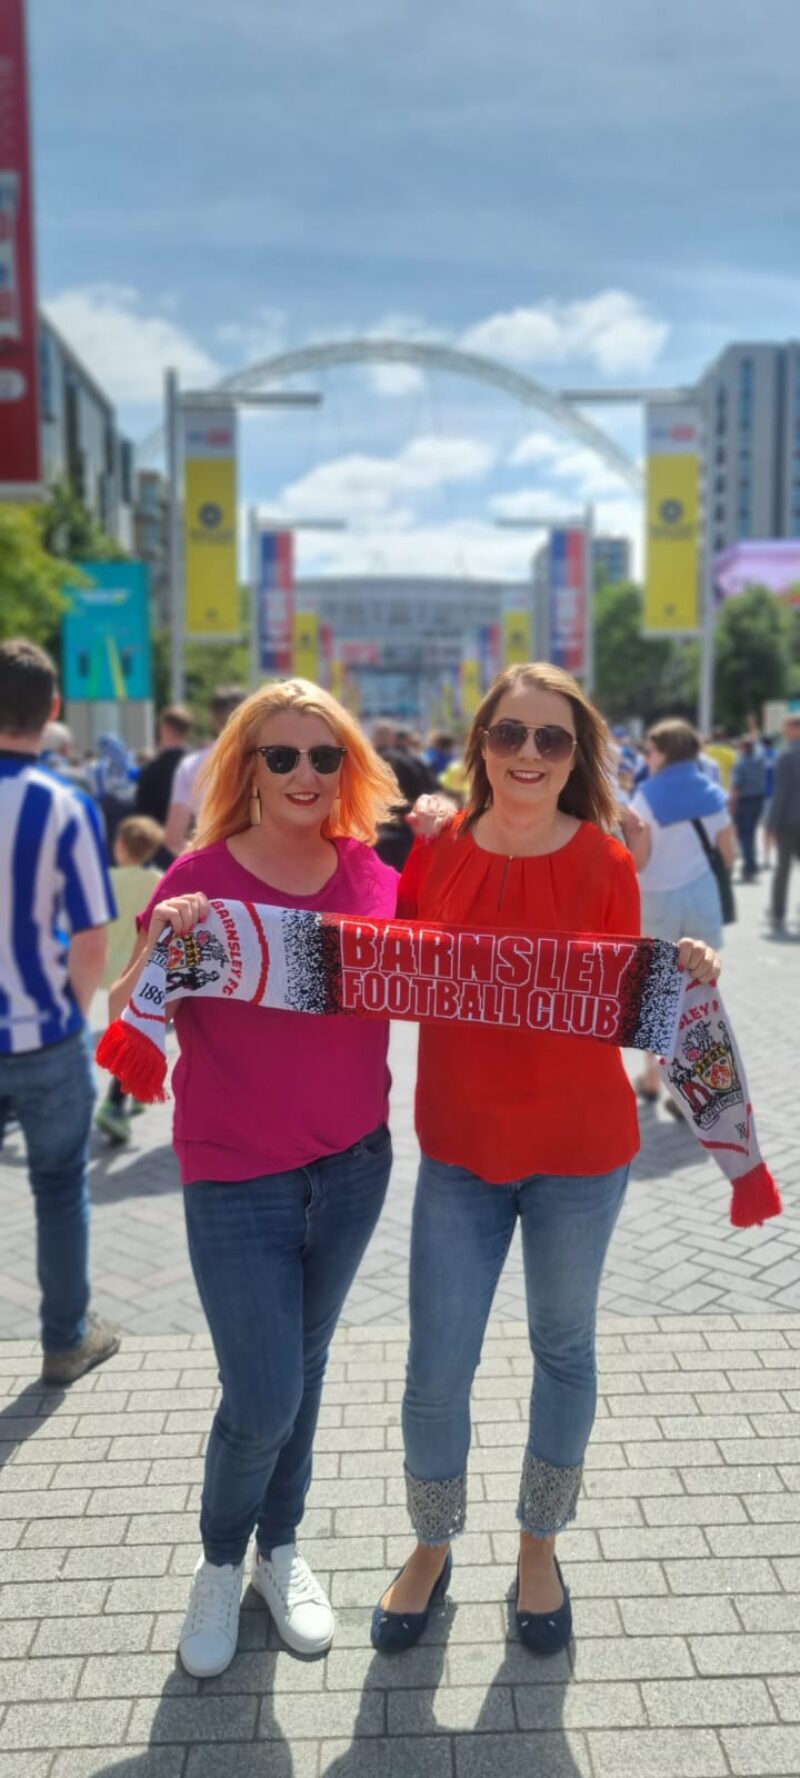 Stephanie Peacock MP and Louise Haigh MP supporting Barnsley FC at Wembley Stadium